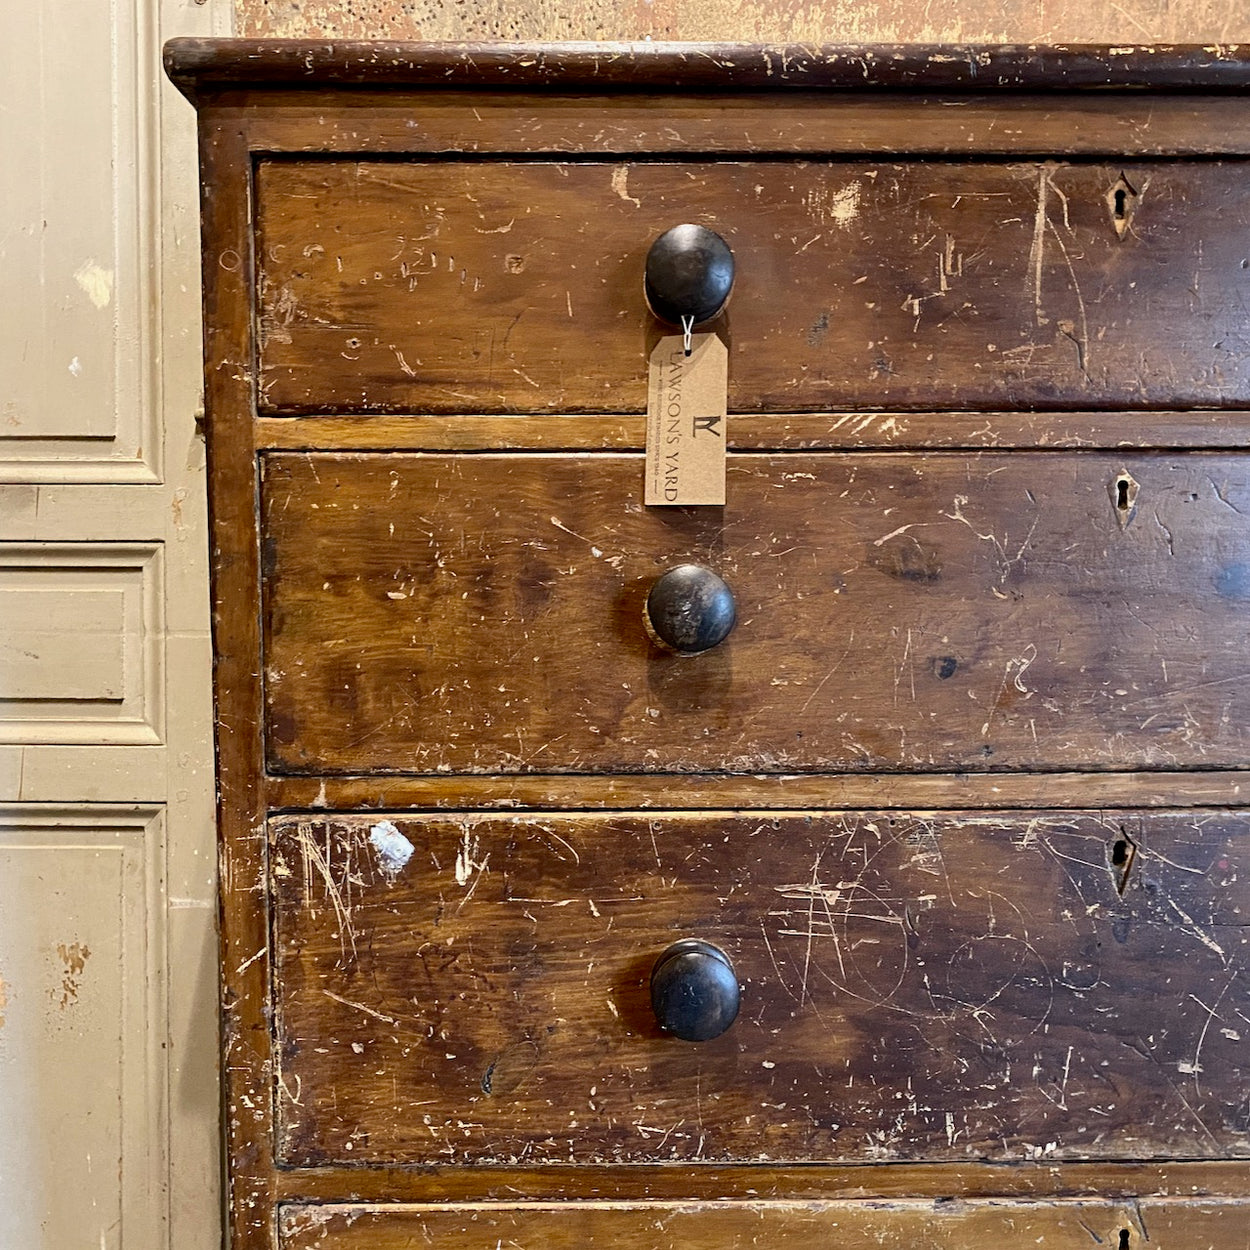 Victorian Welsh Drawers